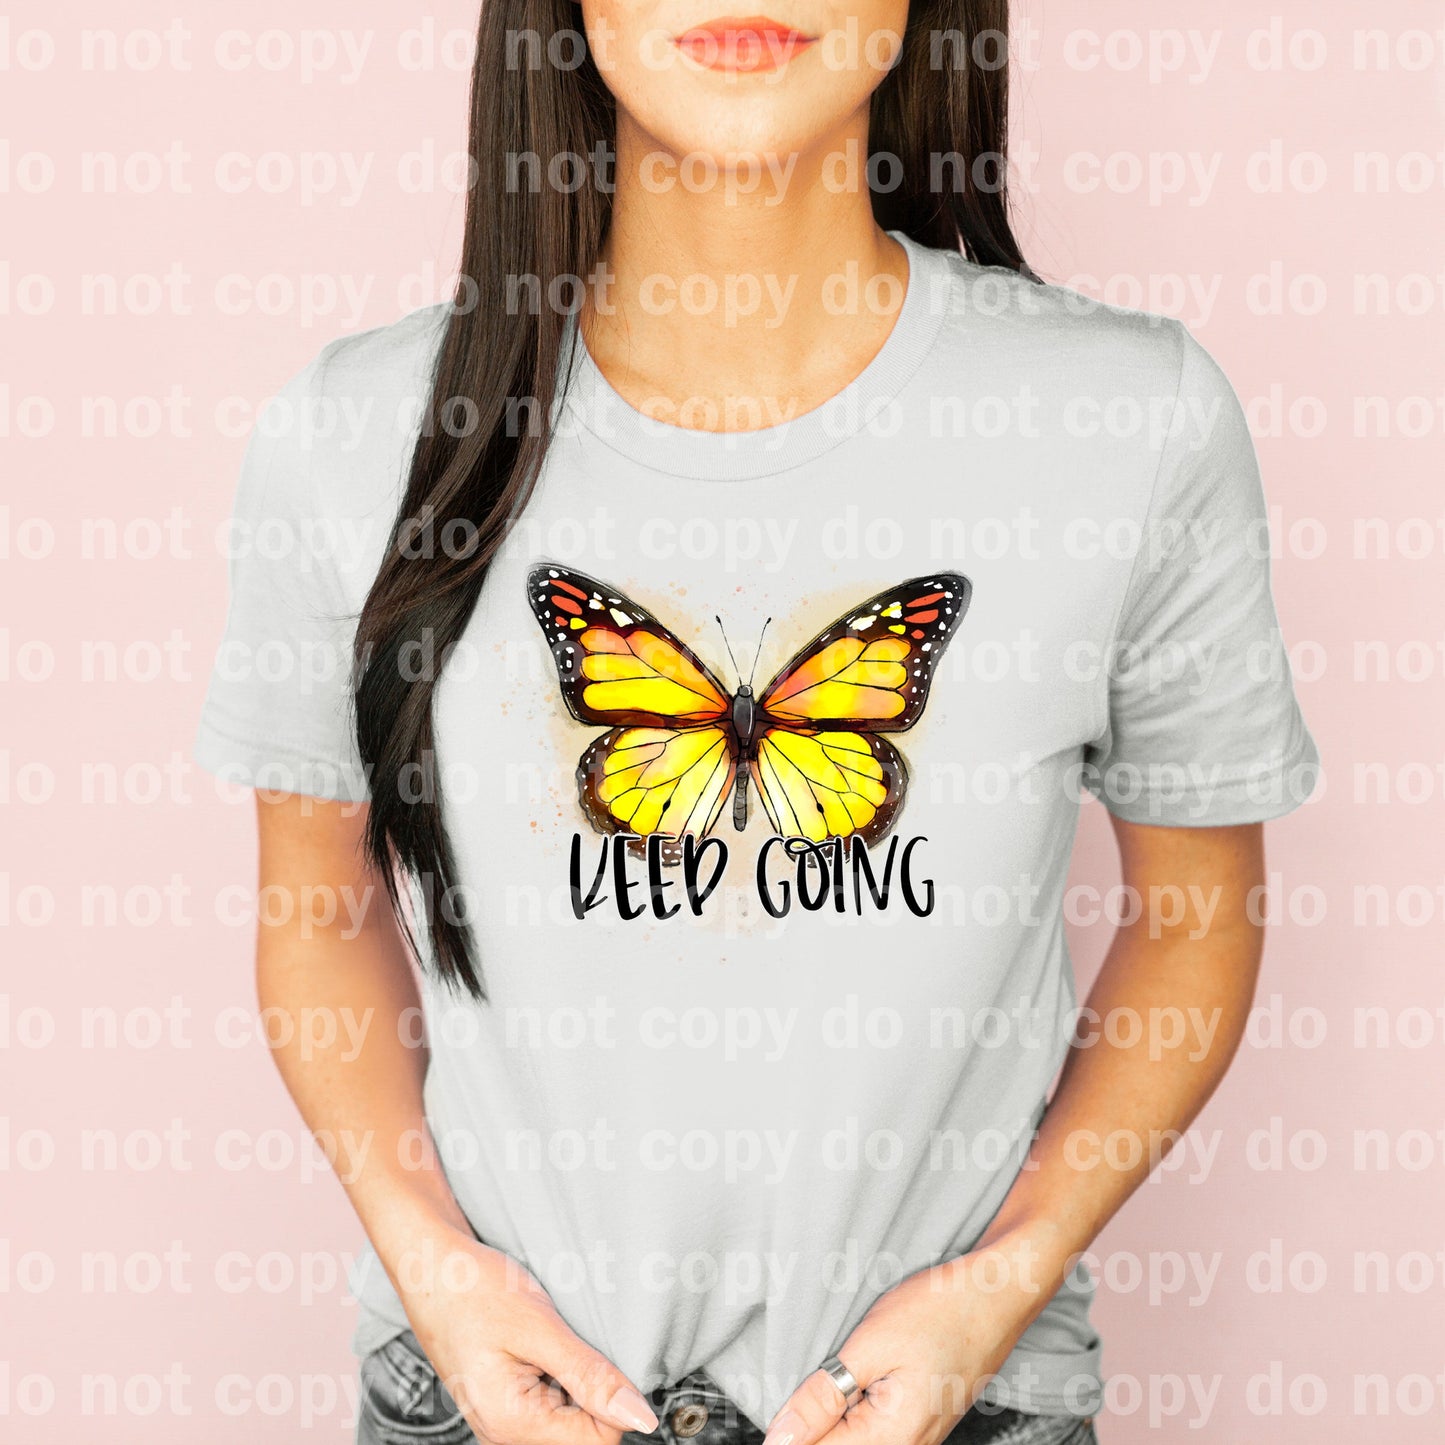 Keep Going Dream Print or Sublimation Print